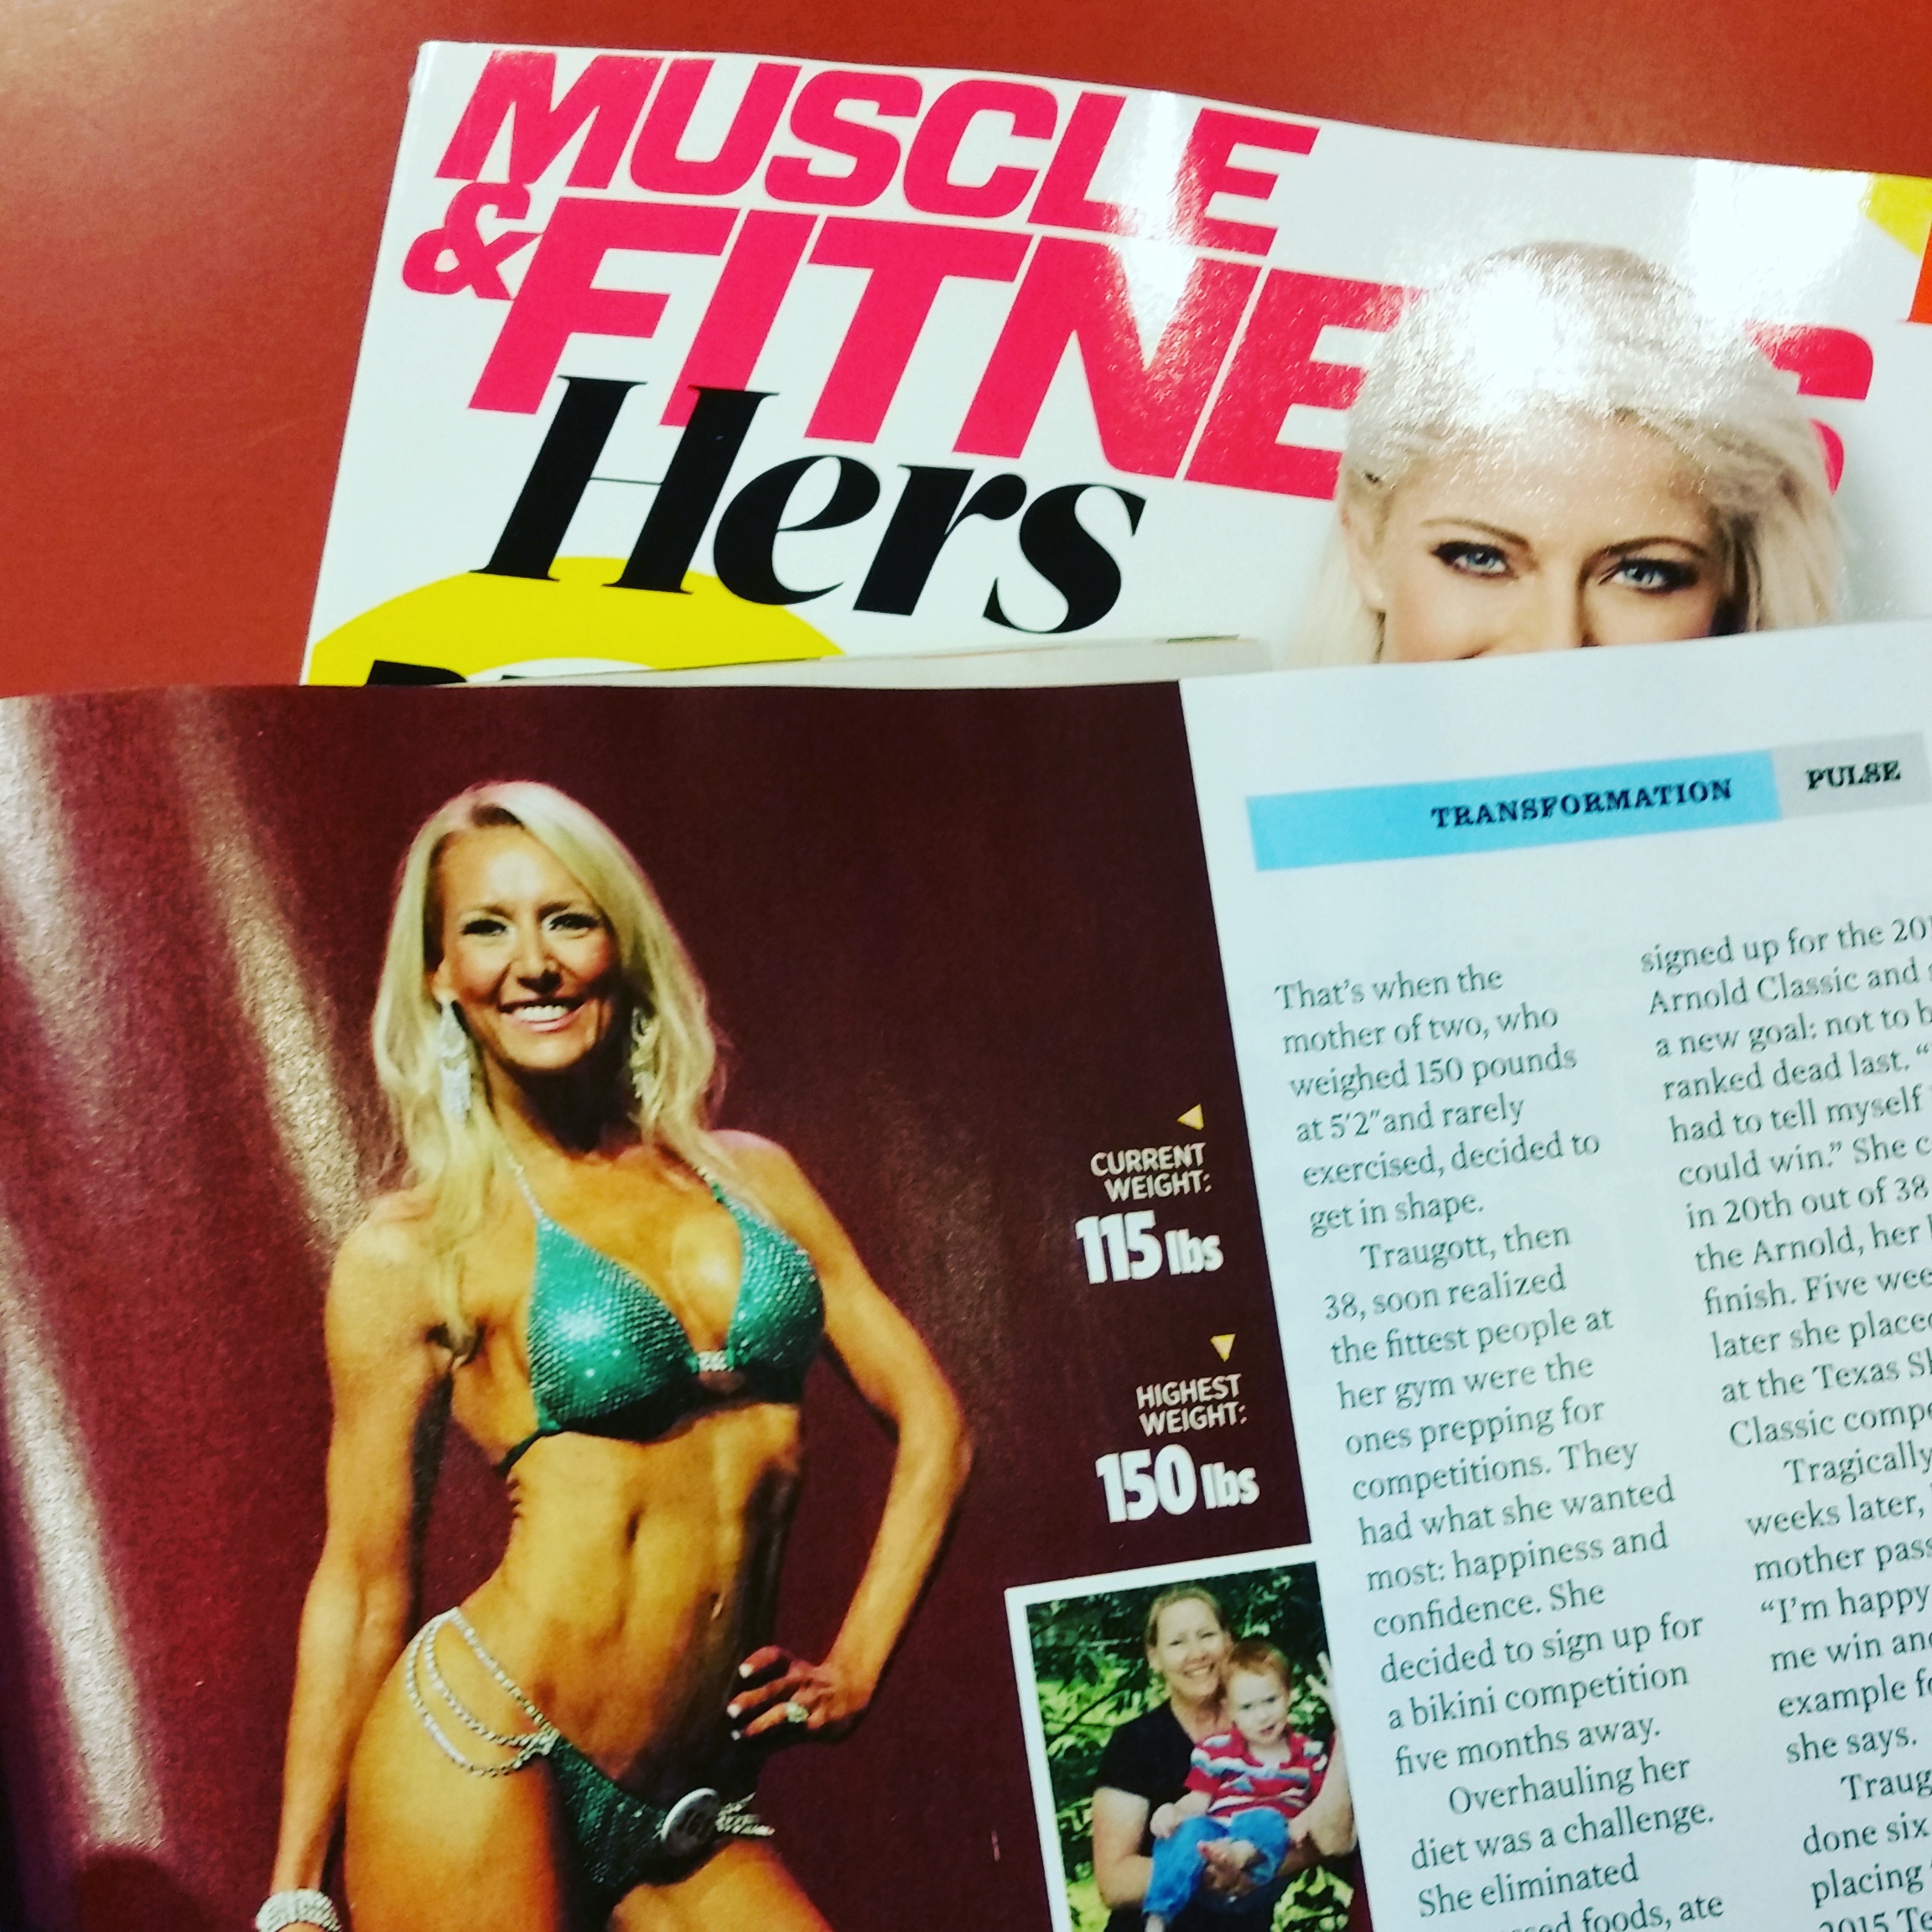 I’m in Muscle & Fitness Hers!